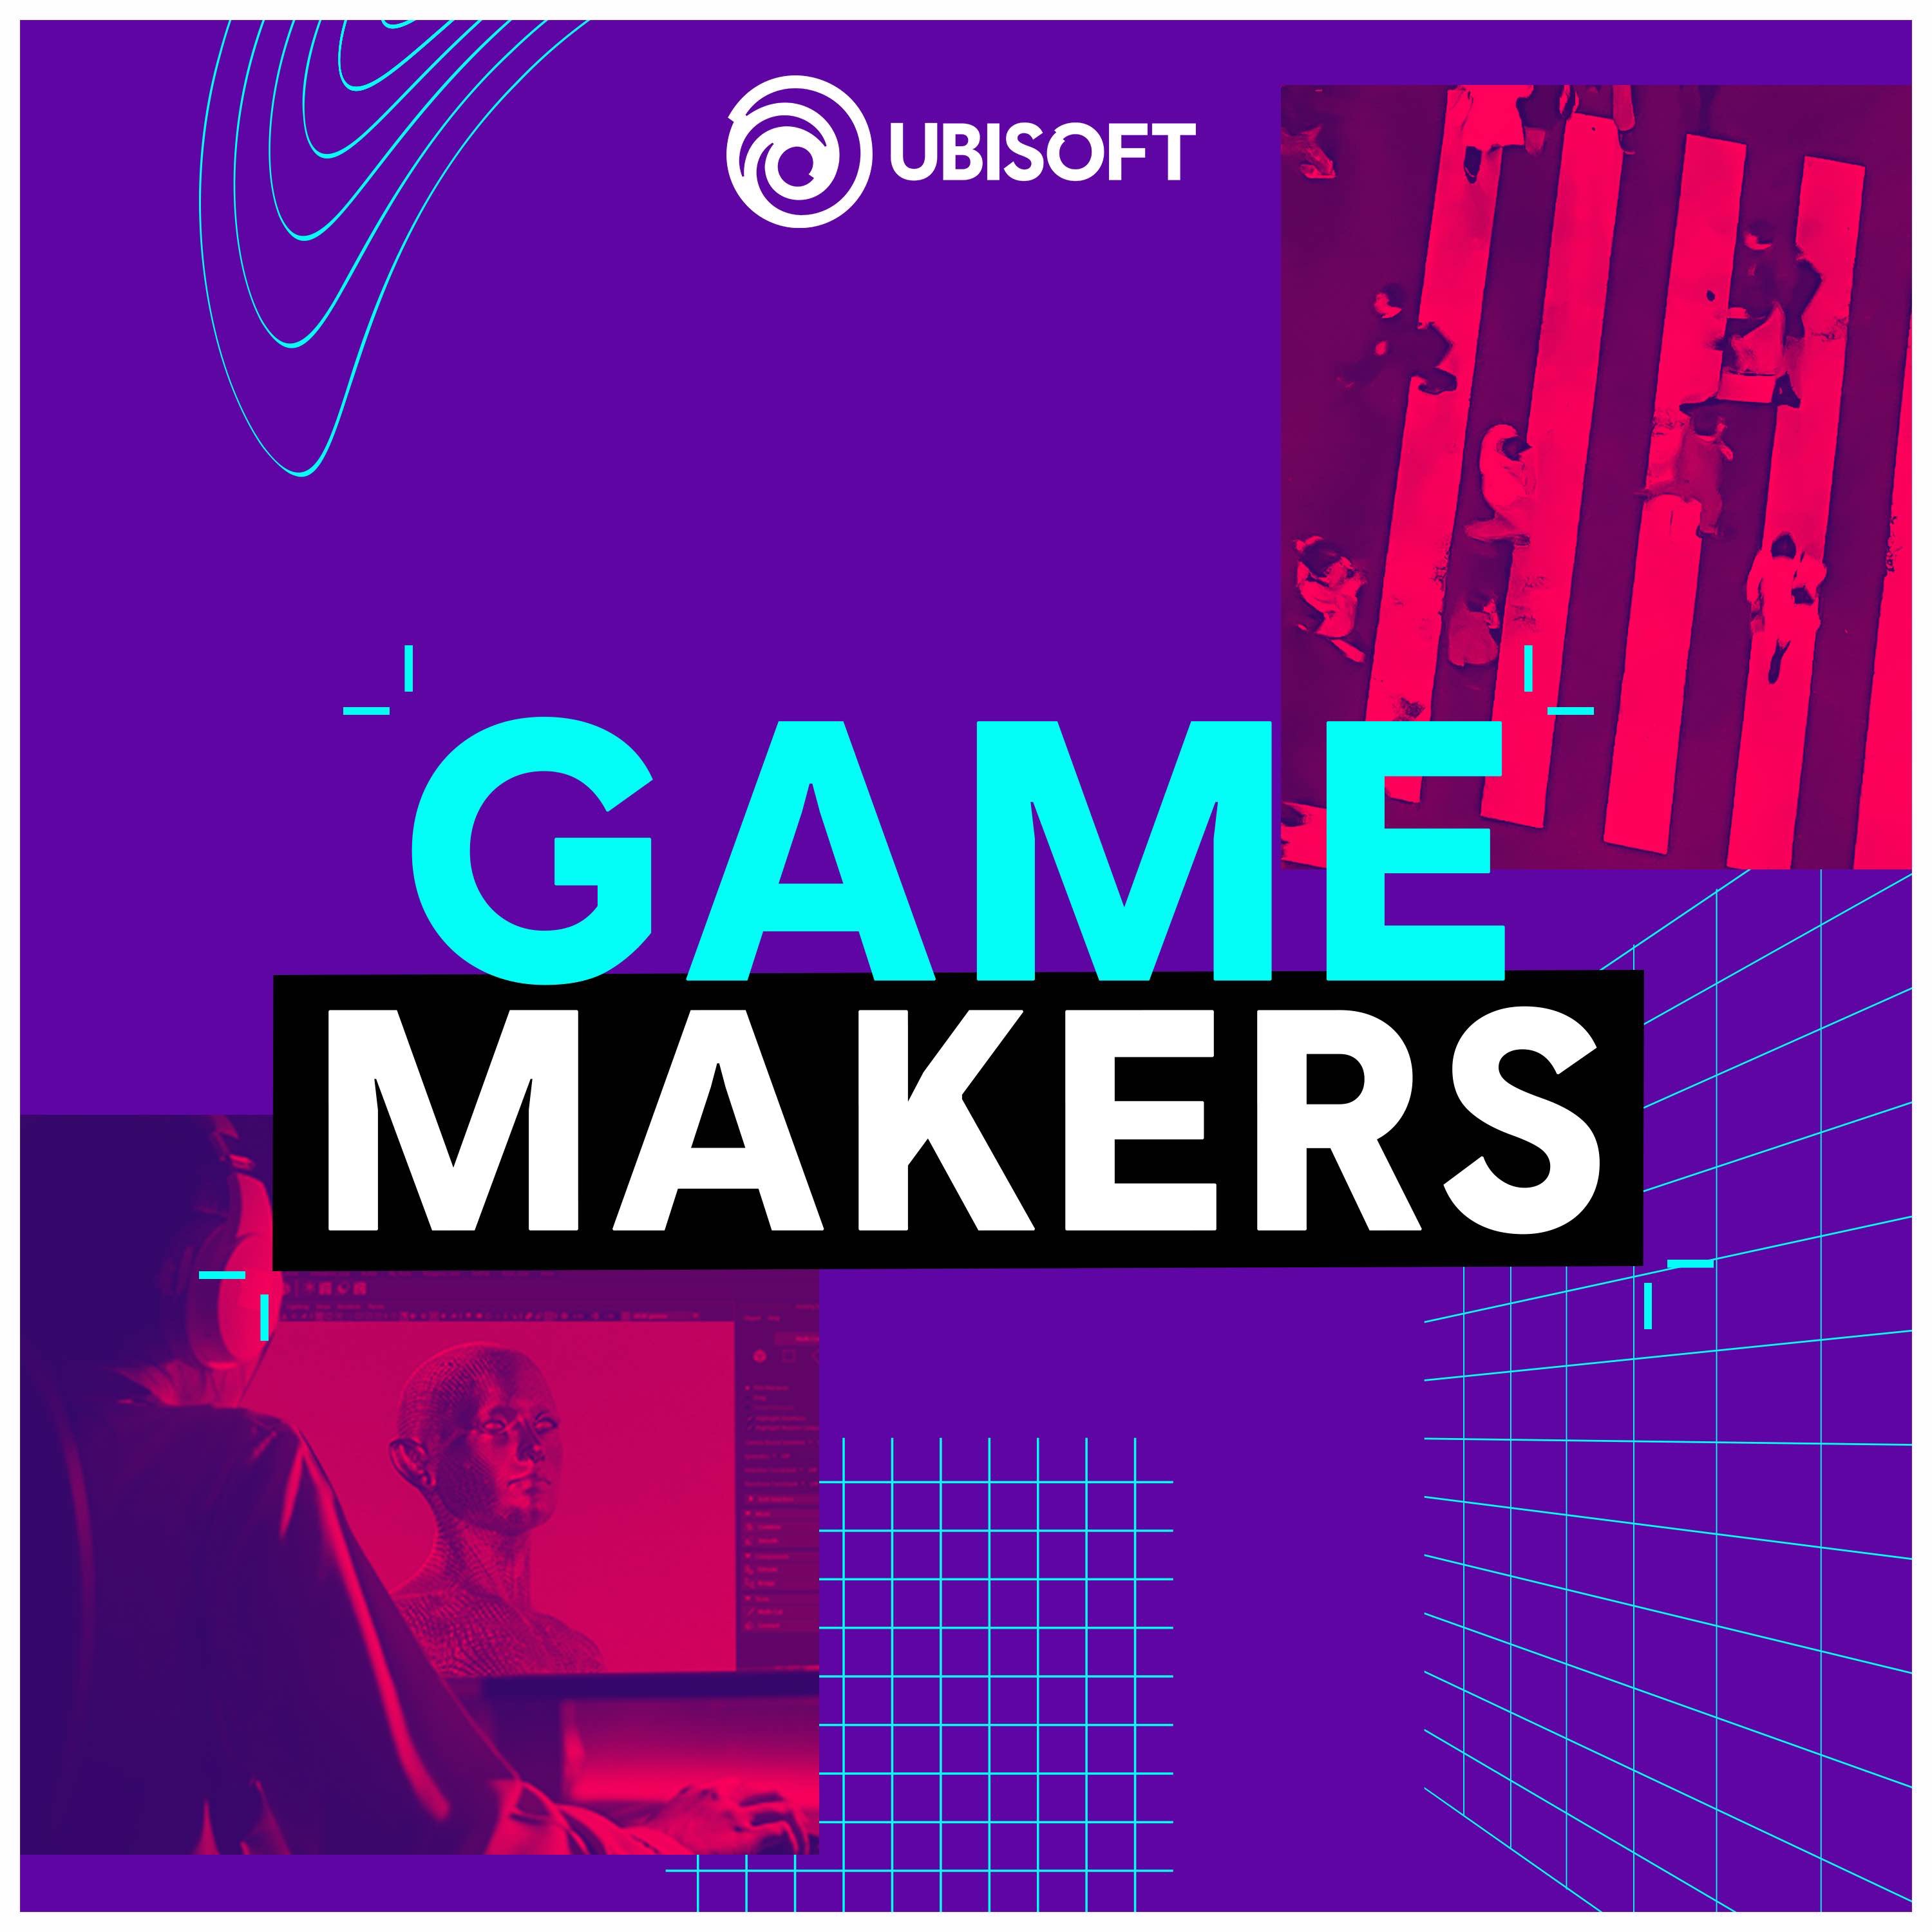 Welcome to Game Makers: A Ubisoft Podcast